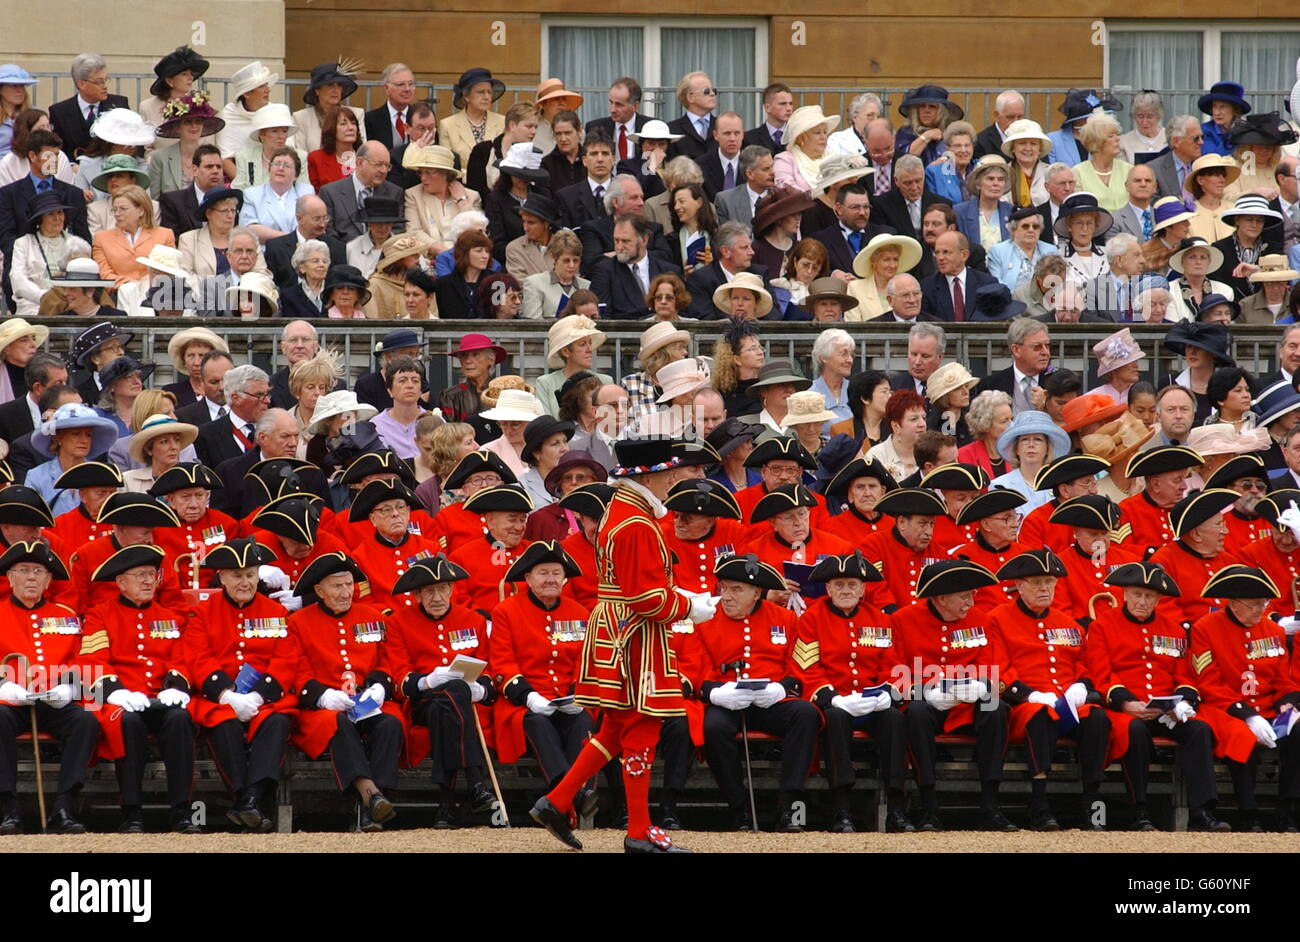 A Yeoman passes rows of seated Chelsea Pensioners from the Royal Hospital Chelsea, during a unique and historic parade of ceremonial royal body guards and Chelsea Pensioners at Buckingham Palace, London. * Distinguished ex-servicemen were taking part in the Buckingham Palace parade and march past, the first of its kind in honour of the Queen's Golden Jubilee. Stock Photo